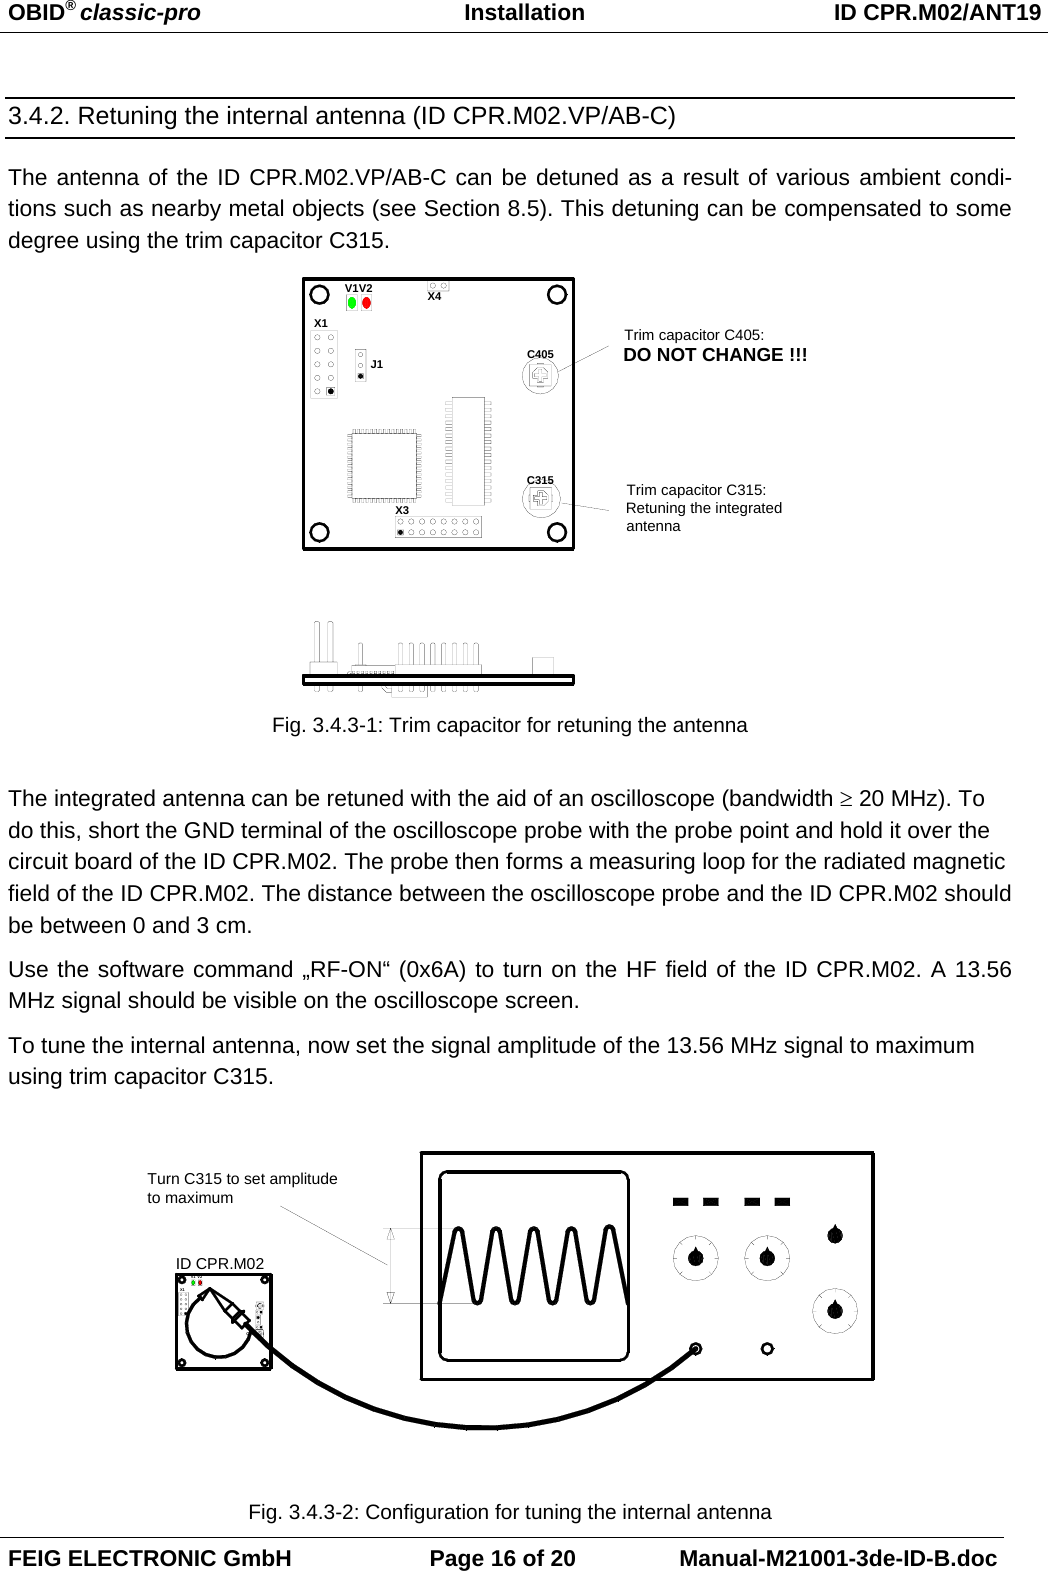 OBID® classic-pro Installation ID CPR.M02/ANT19FEIG ELECTRONIC GmbH Page 16 of 20 Manual-M21001-3de-ID-B.doc3.4.2. Retuning the internal antenna (ID CPR.M02.VP/AB-C)The antenna of the ID CPR.M02.VP/AB-C can be detuned as a result of various ambient condi-tions such as nearby metal objects (see Section 8.5). This detuning can be compensated to somedegree using the trim capacitor C315.Fig. 3.4.3-1: Trim capacitor for retuning the antennaThe integrated antenna can be retuned with the aid of an oscilloscope (bandwidth ≥ 20 MHz). Todo this, short the GND terminal of the oscilloscope probe with the probe point and hold it over thecircuit board of the ID CPR.M02. The probe then forms a measuring loop for the radiated magneticfield of the ID CPR.M02. The distance between the oscilloscope probe and the ID CPR.M02 shouldbe between 0 and 3 cm.Use the software command „RF-ON“ (0x6A) to turn on the HF field of the ID CPR.M02. A 13.56MHz signal should be visible on the oscilloscope screen. To tune the internal antenna, now set the signal amplitude of the 13.56 MHz signal to maximumusing trim capacitor C315.Fig. 3.4.3-2: Configuration for tuning the internal antennaX1J1V2V1C315X3X4C405Trim capacitor C315:Retuning the integrated antennaTrim capacitor C405:DO NOT CHANGE !!!ID CPR.M02V1 V2X1C65Turn C315 to set amplitude to maximum